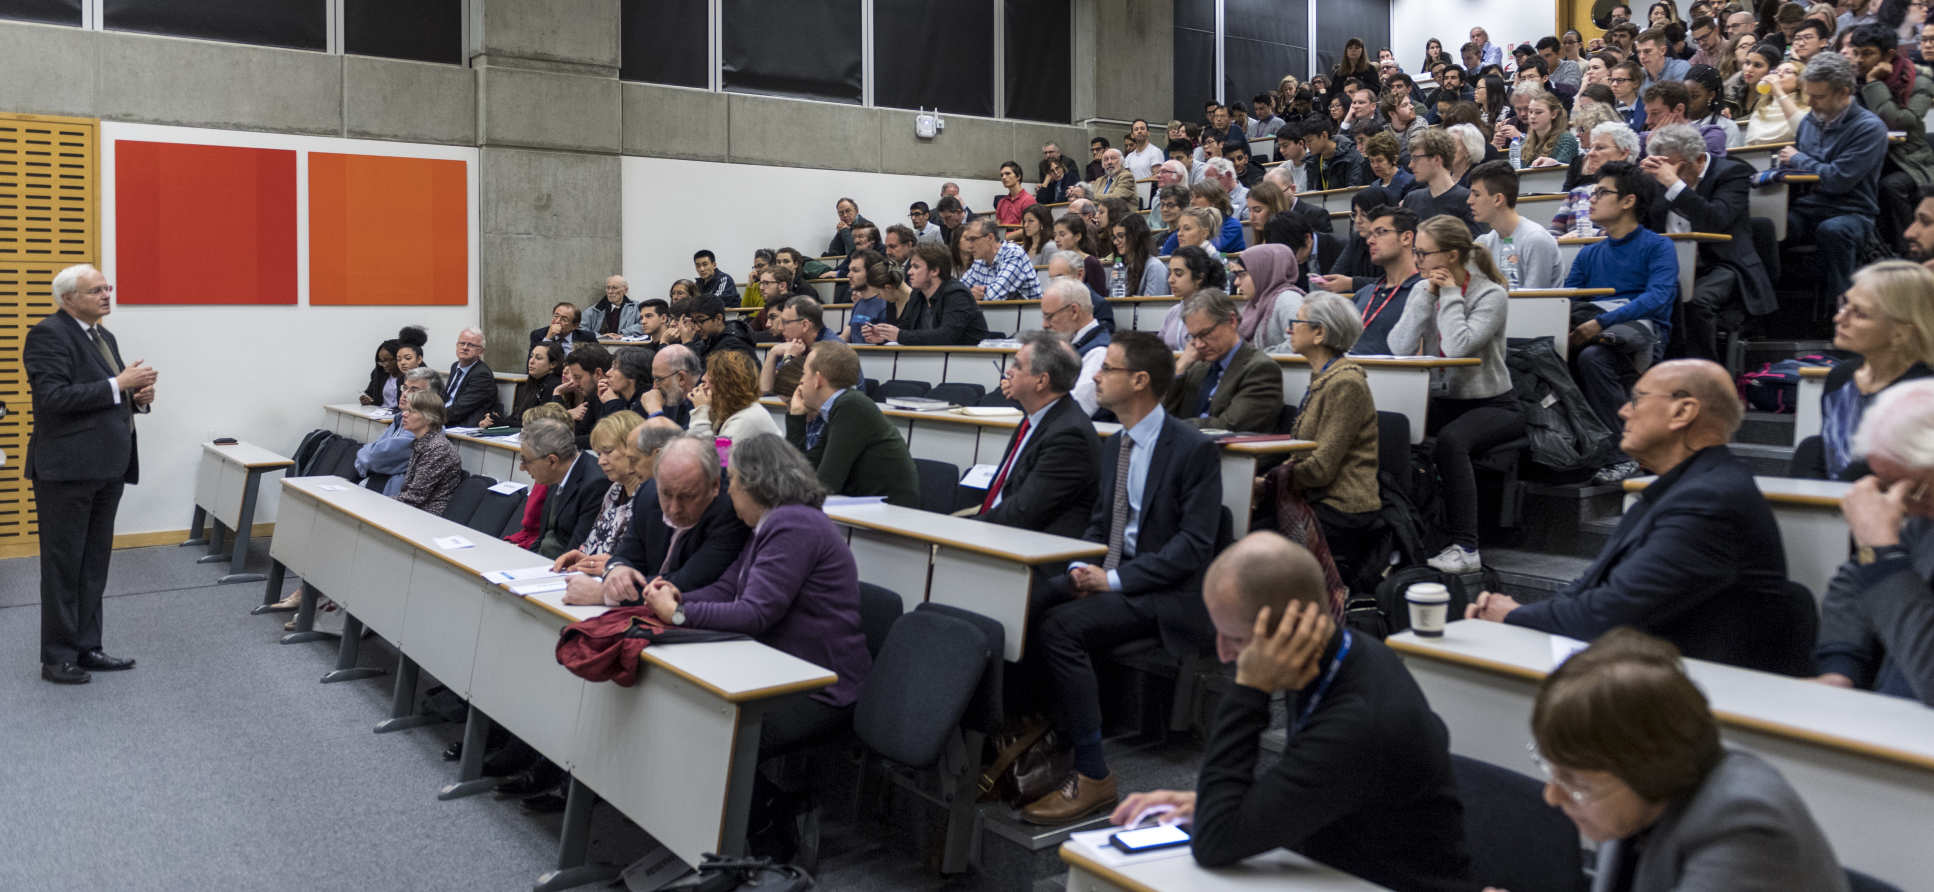 A packed lecture hall at the Sir Ernst Chain Lecture 2018